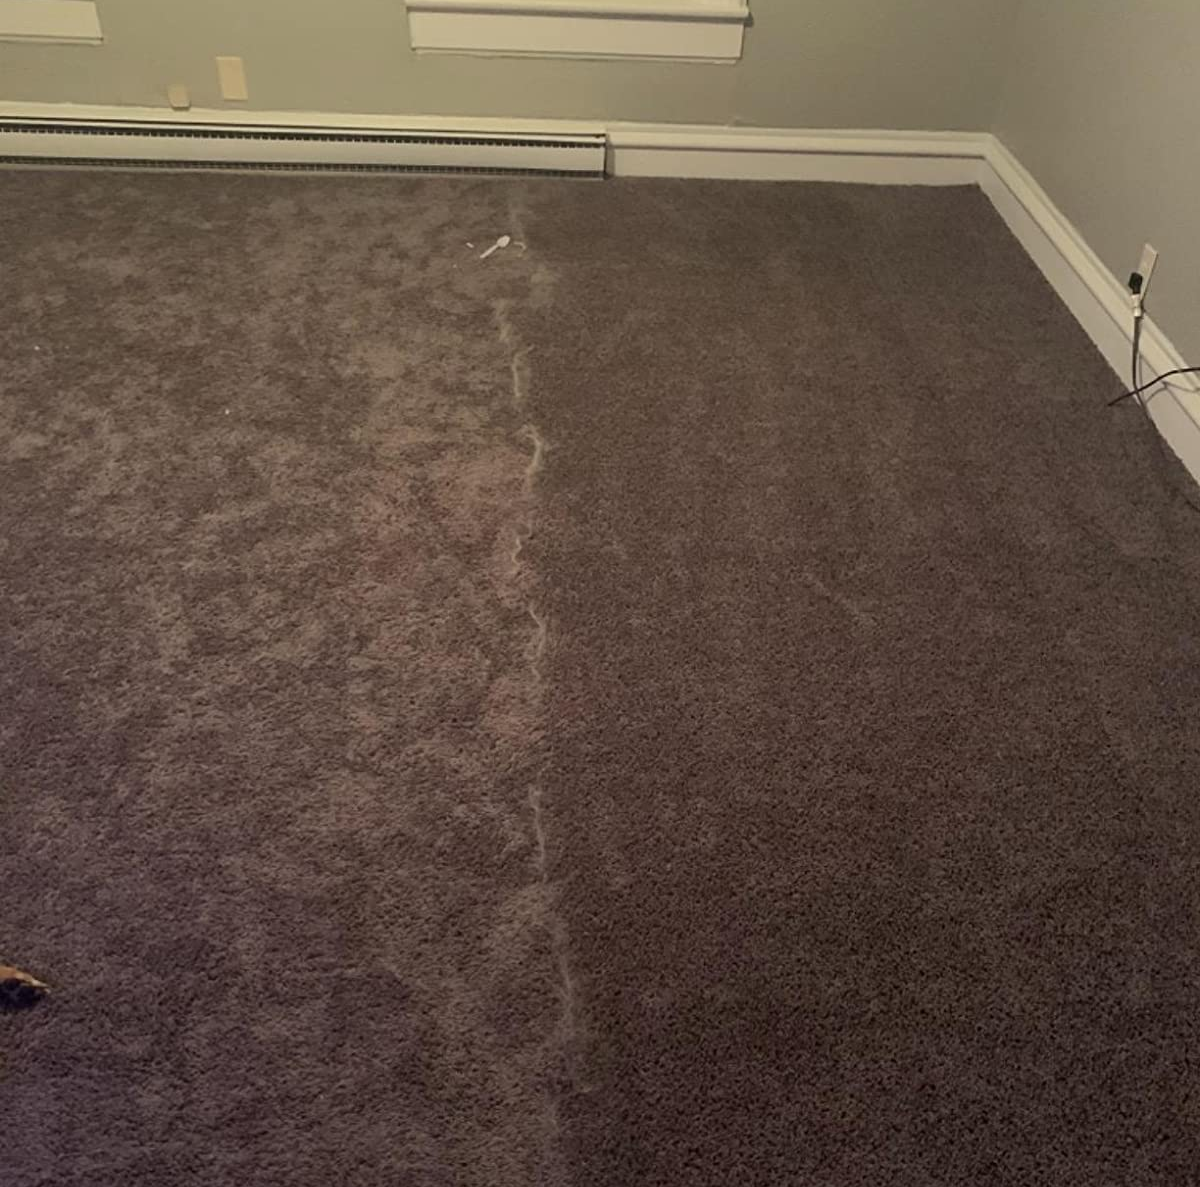 Reviewer photo of a portion of their carpet covered in dog hair and the other cleaned with the broom